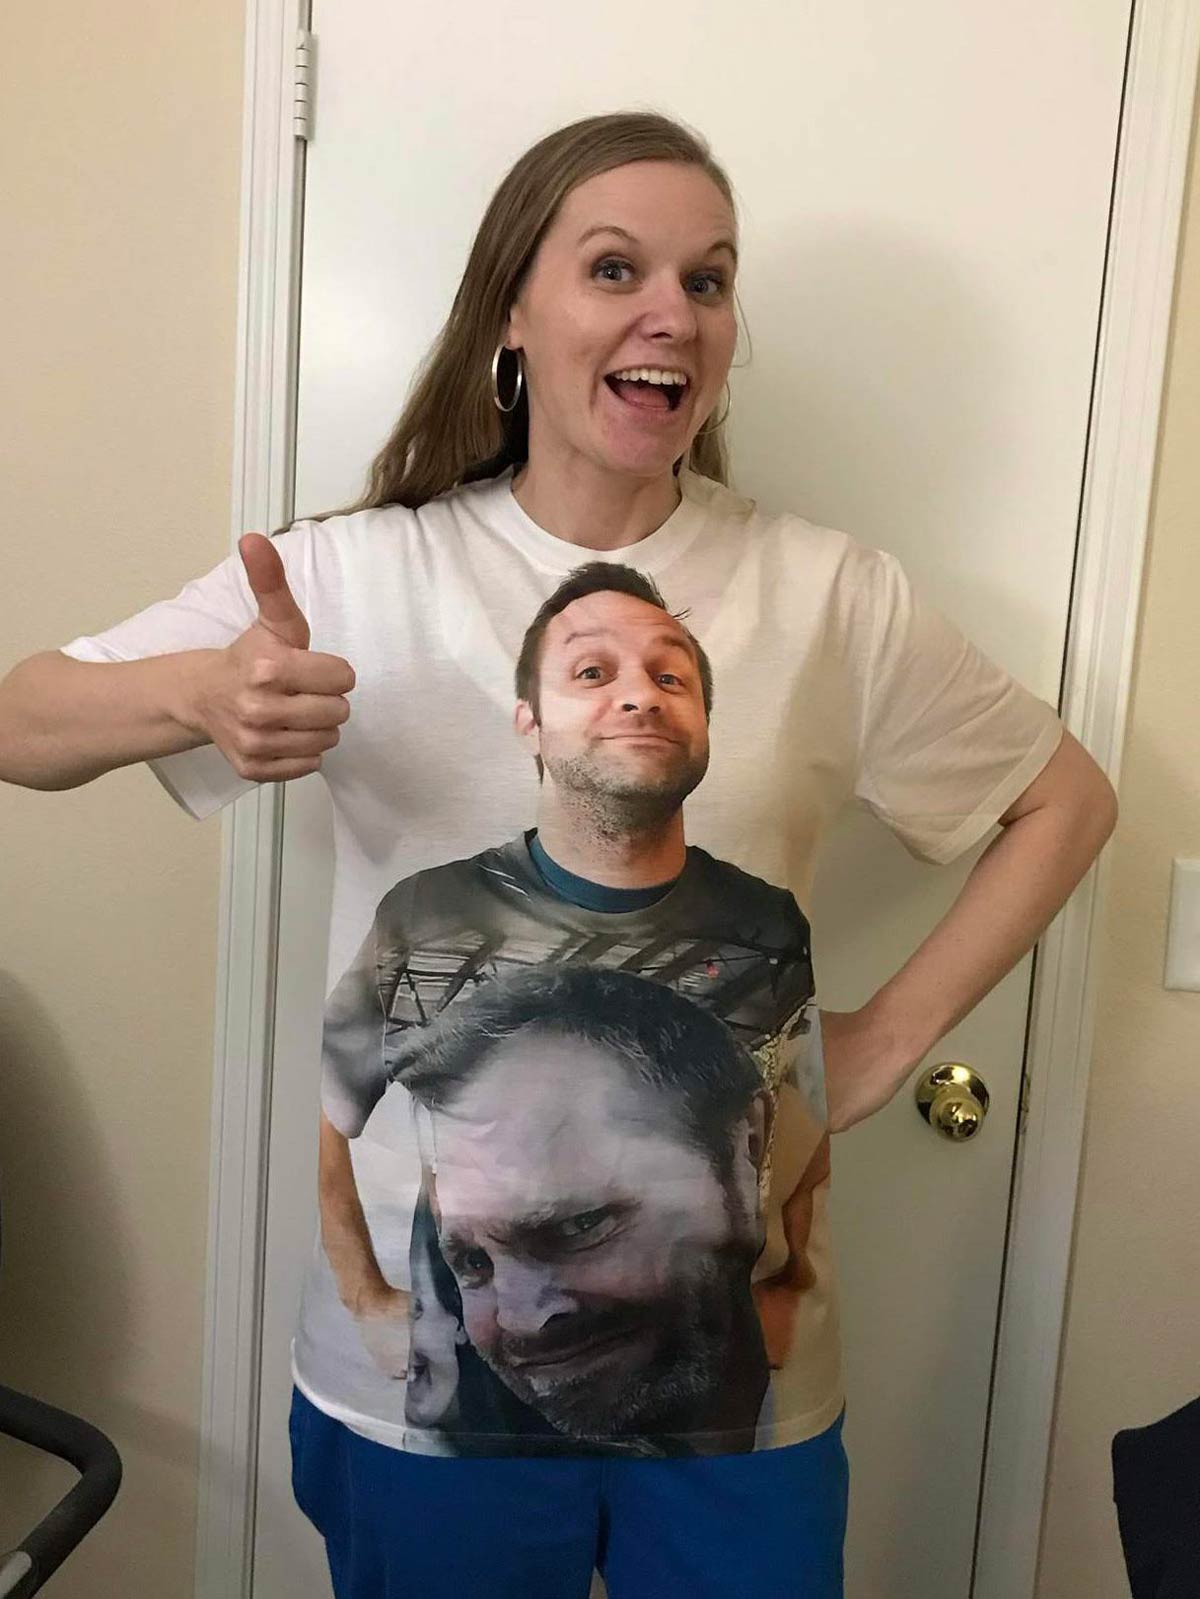 My sister wearing a shirt of me wearing a shirt of my brother